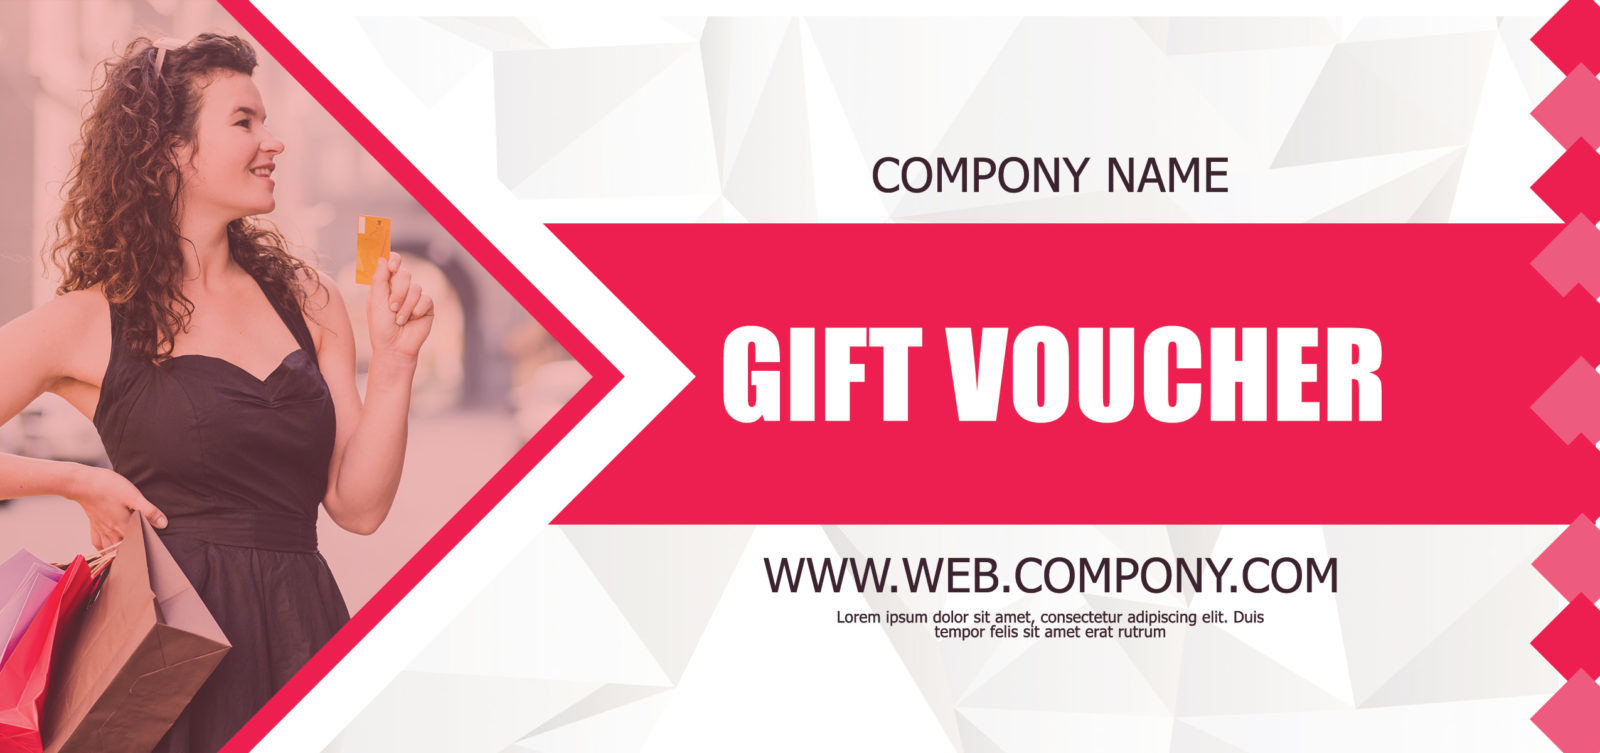 Discount Coupon PSD Template, voucher design template, coupon mockup psd free, coupon template, gift voucher psd free download, coupon template word, discount voucher template word, coupon design, coupon design vector, discount voucher template psd, gift certificate template photoshop, coupon vector, Food discount voucher, food panda coupons, food coupons mumbai, food coupons hyderabad, food coupons bangalore, swiggy coupons, food offers today, zomato coupons, foodpanda coupons for old users, Food discount voucher psd, food voucher template, coupon design template, lucky draw coupon design, voucher mockup, gift voucher psd, Fashion discount voucher psd, coupon design template psd, free gift certificate mockup, business event invitation templates, formal event invitation template, corporate invitation card design template, holiday, enjoy, simple flyer design, free flyer, free templates, free graphic, free design, best templates, best psd, best flyer, free download psd, free psd, download psd, psd free, psd download, freedownloadpsd, free, download, psd freebies, freebies, club, light theme invitation, night party, party, flyers, print